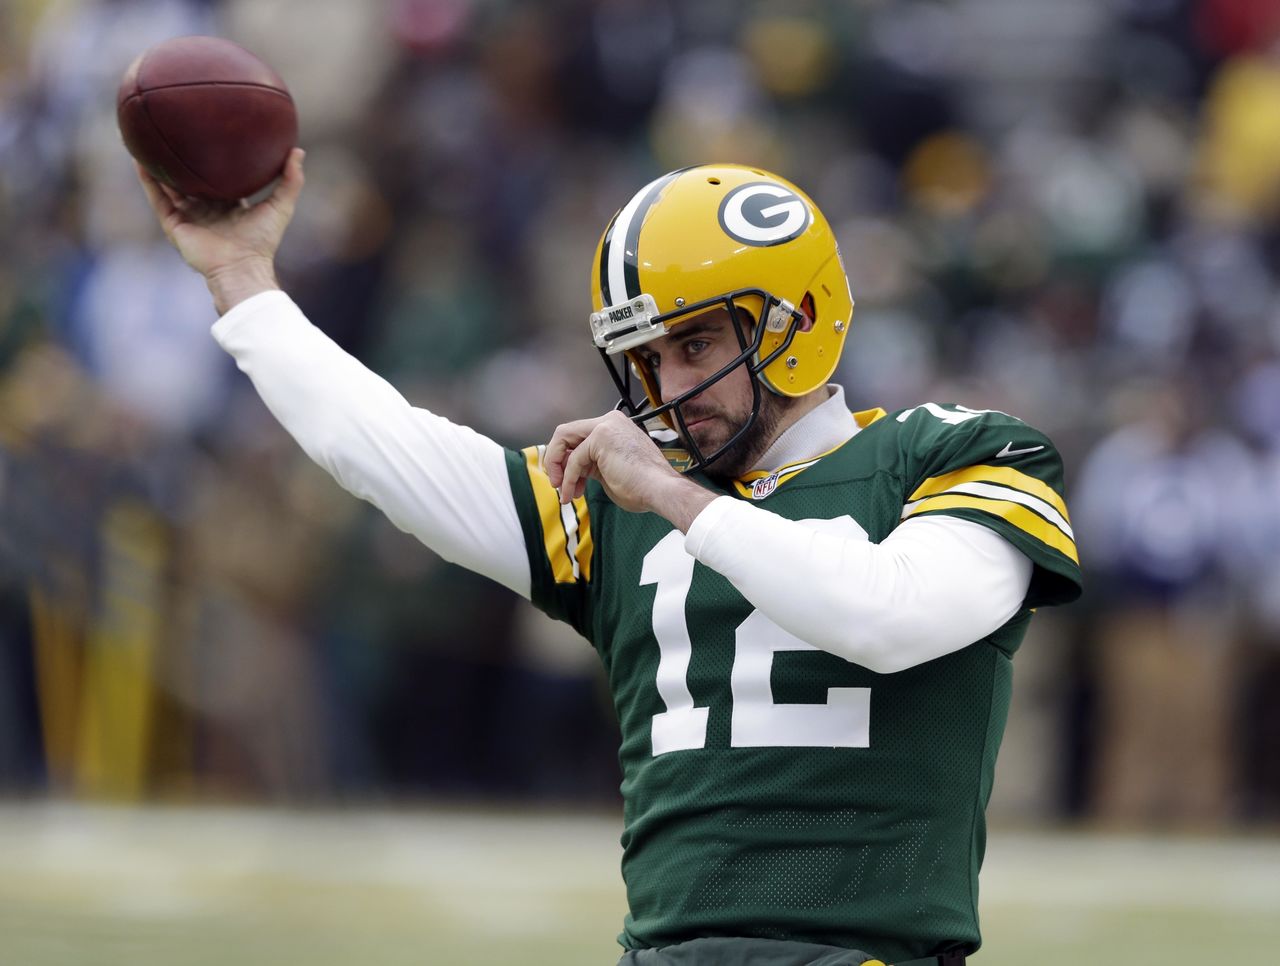 VIDEO: Aaron Rodgers throws ball 45 yards into net